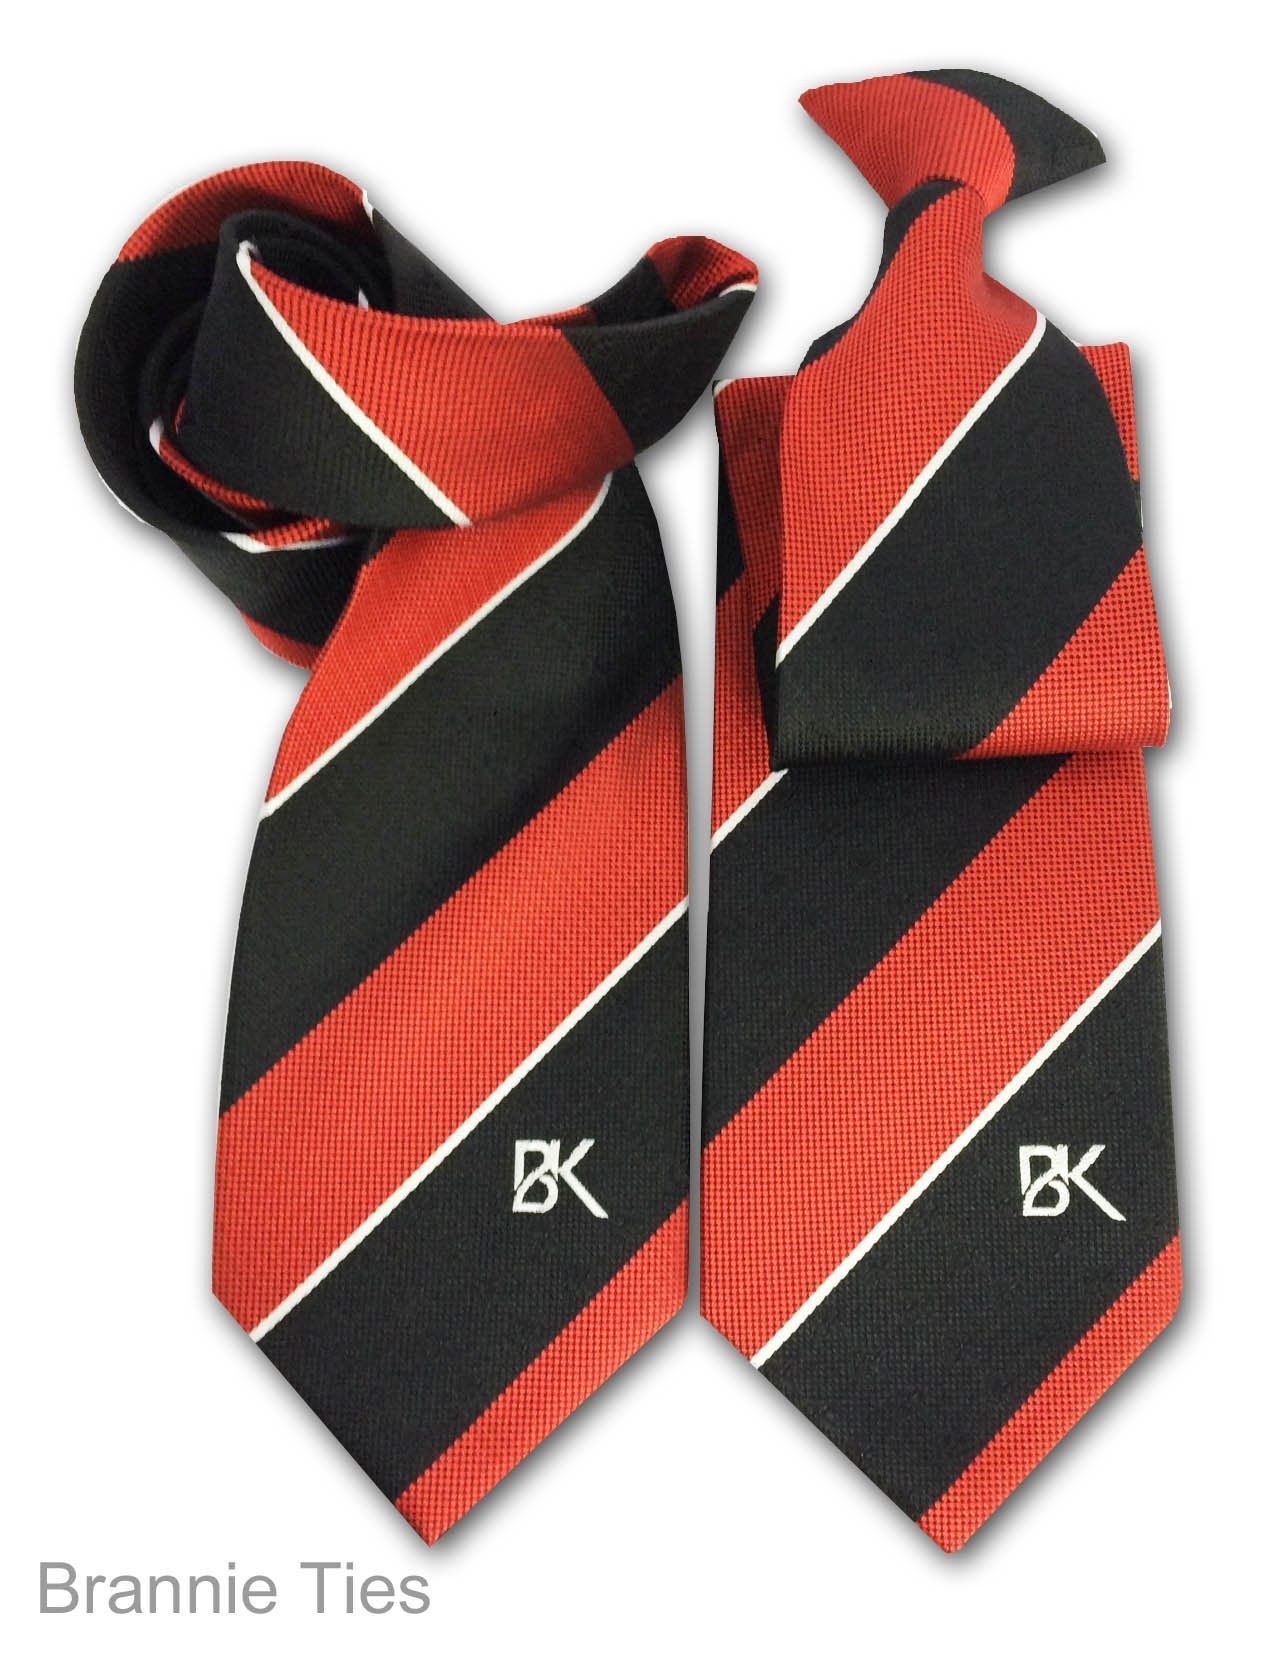 clip-on ties and straight ties